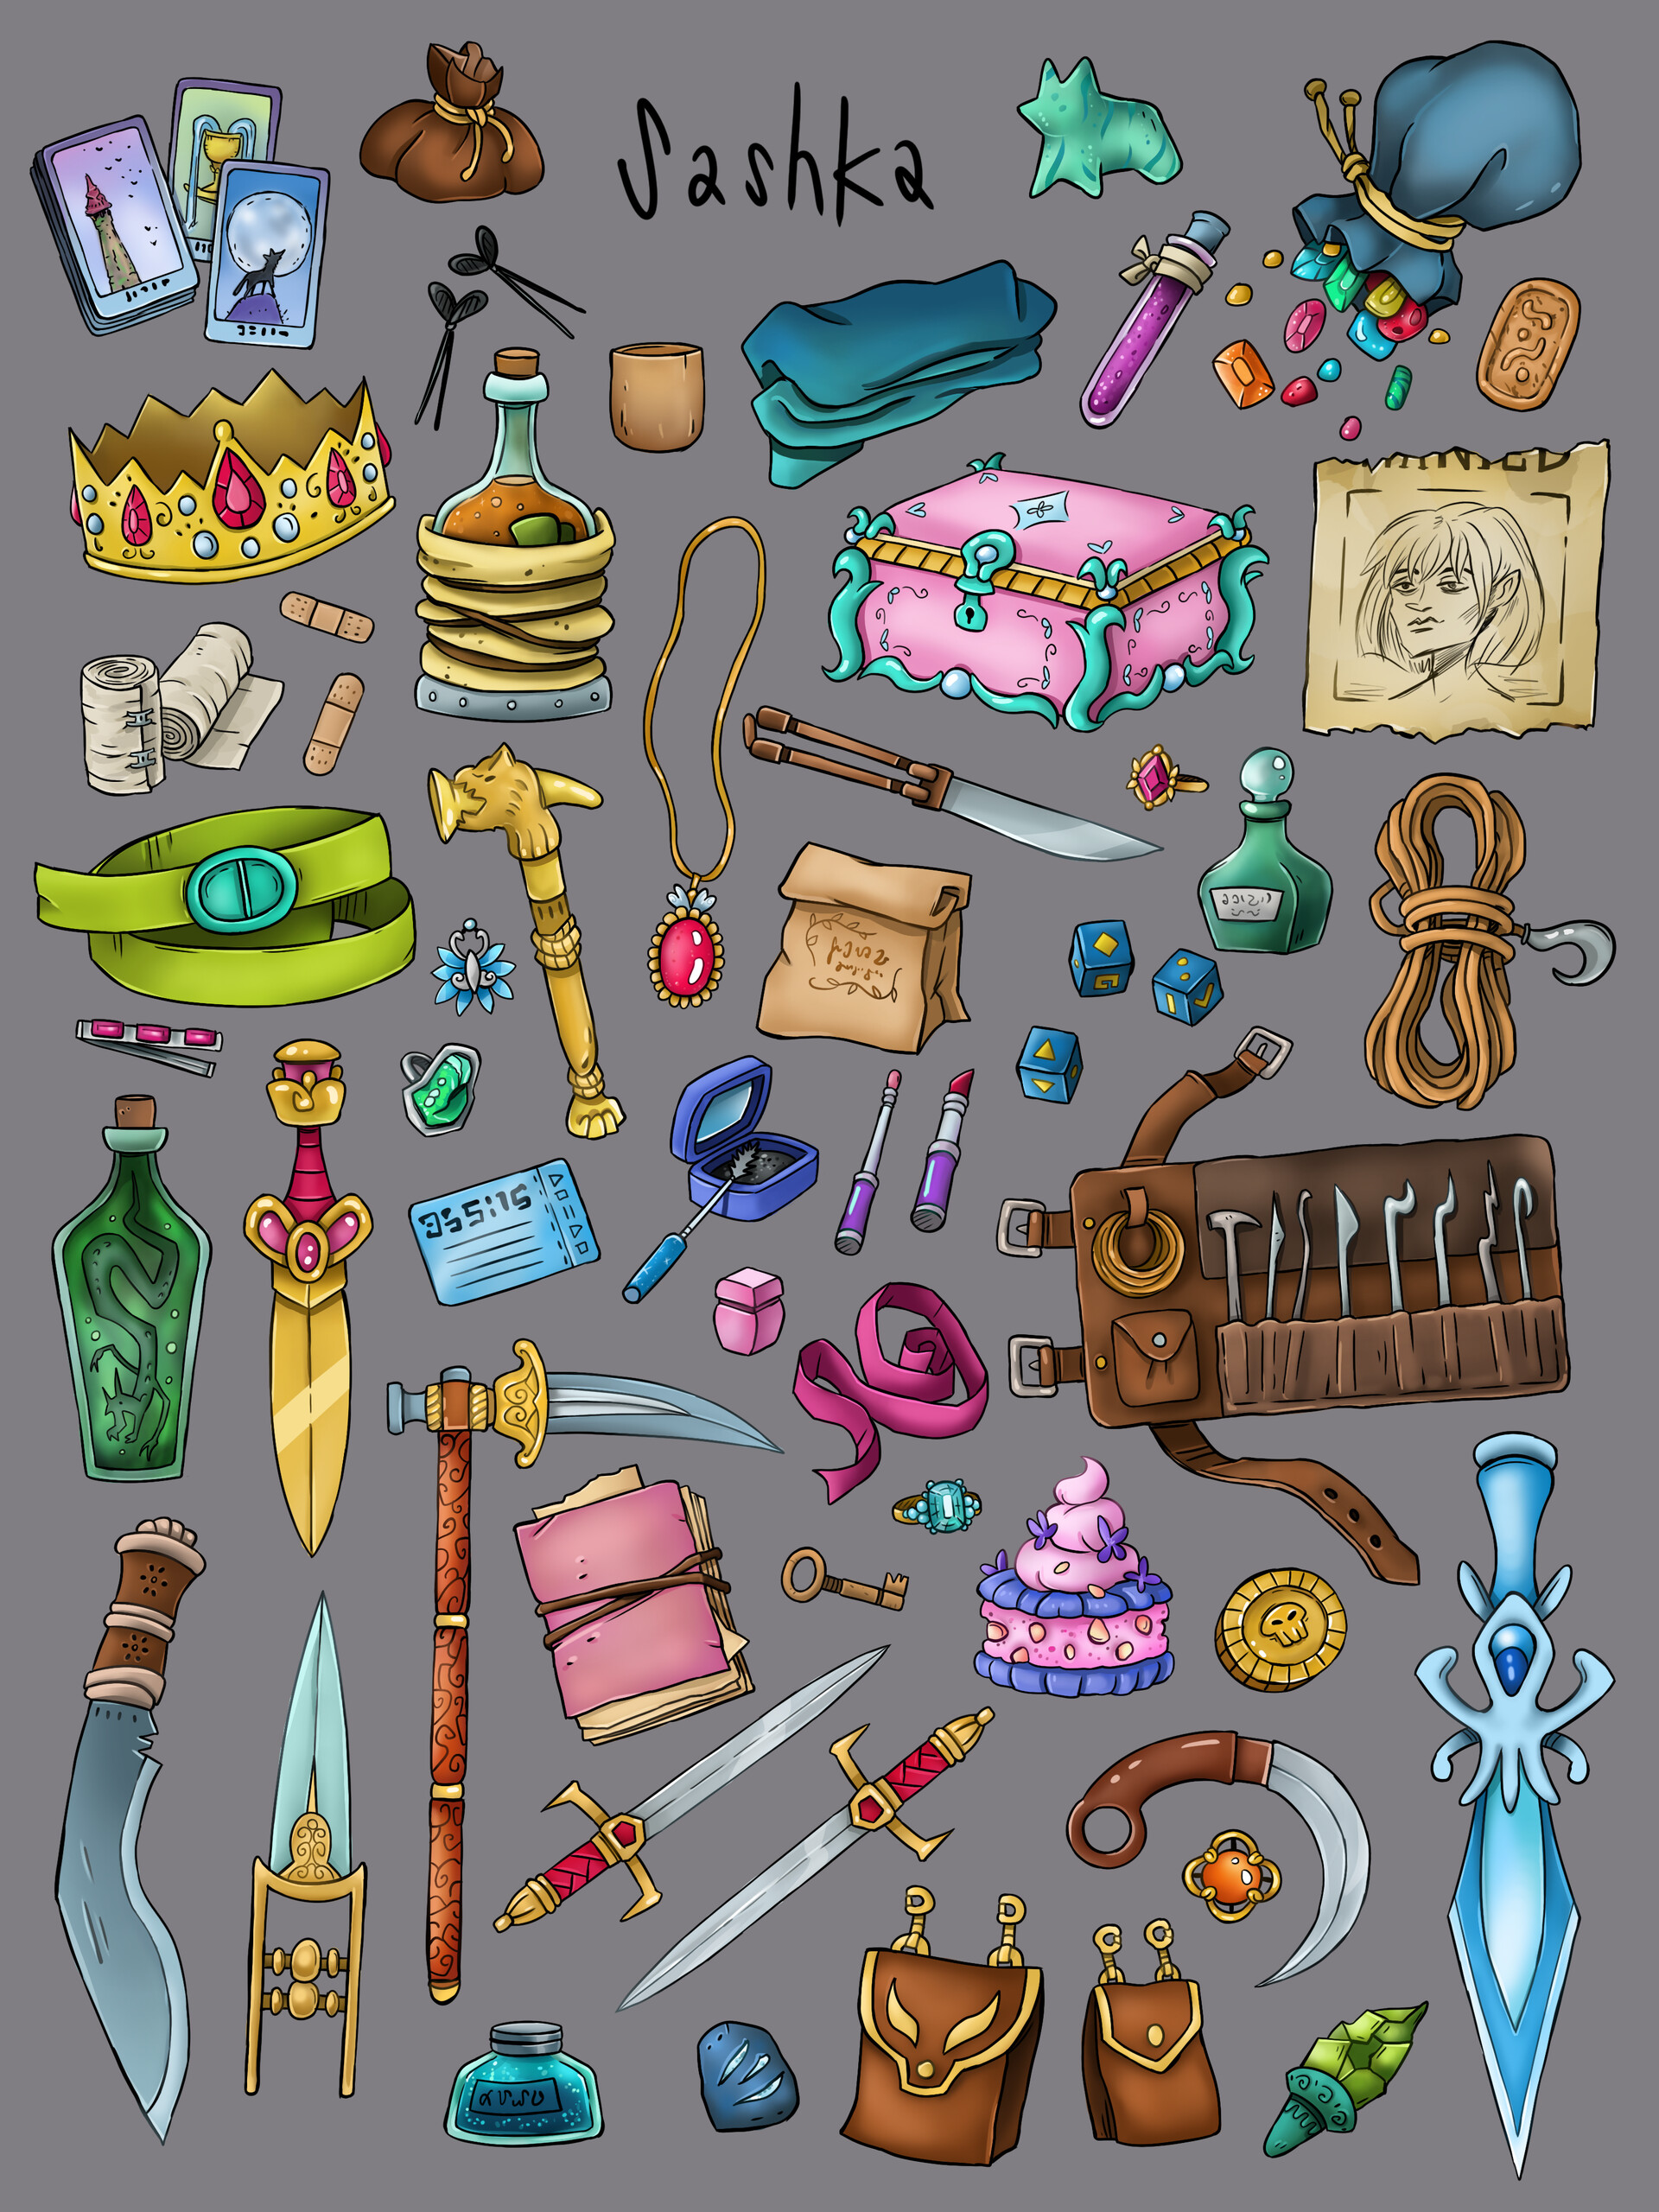 magical objects